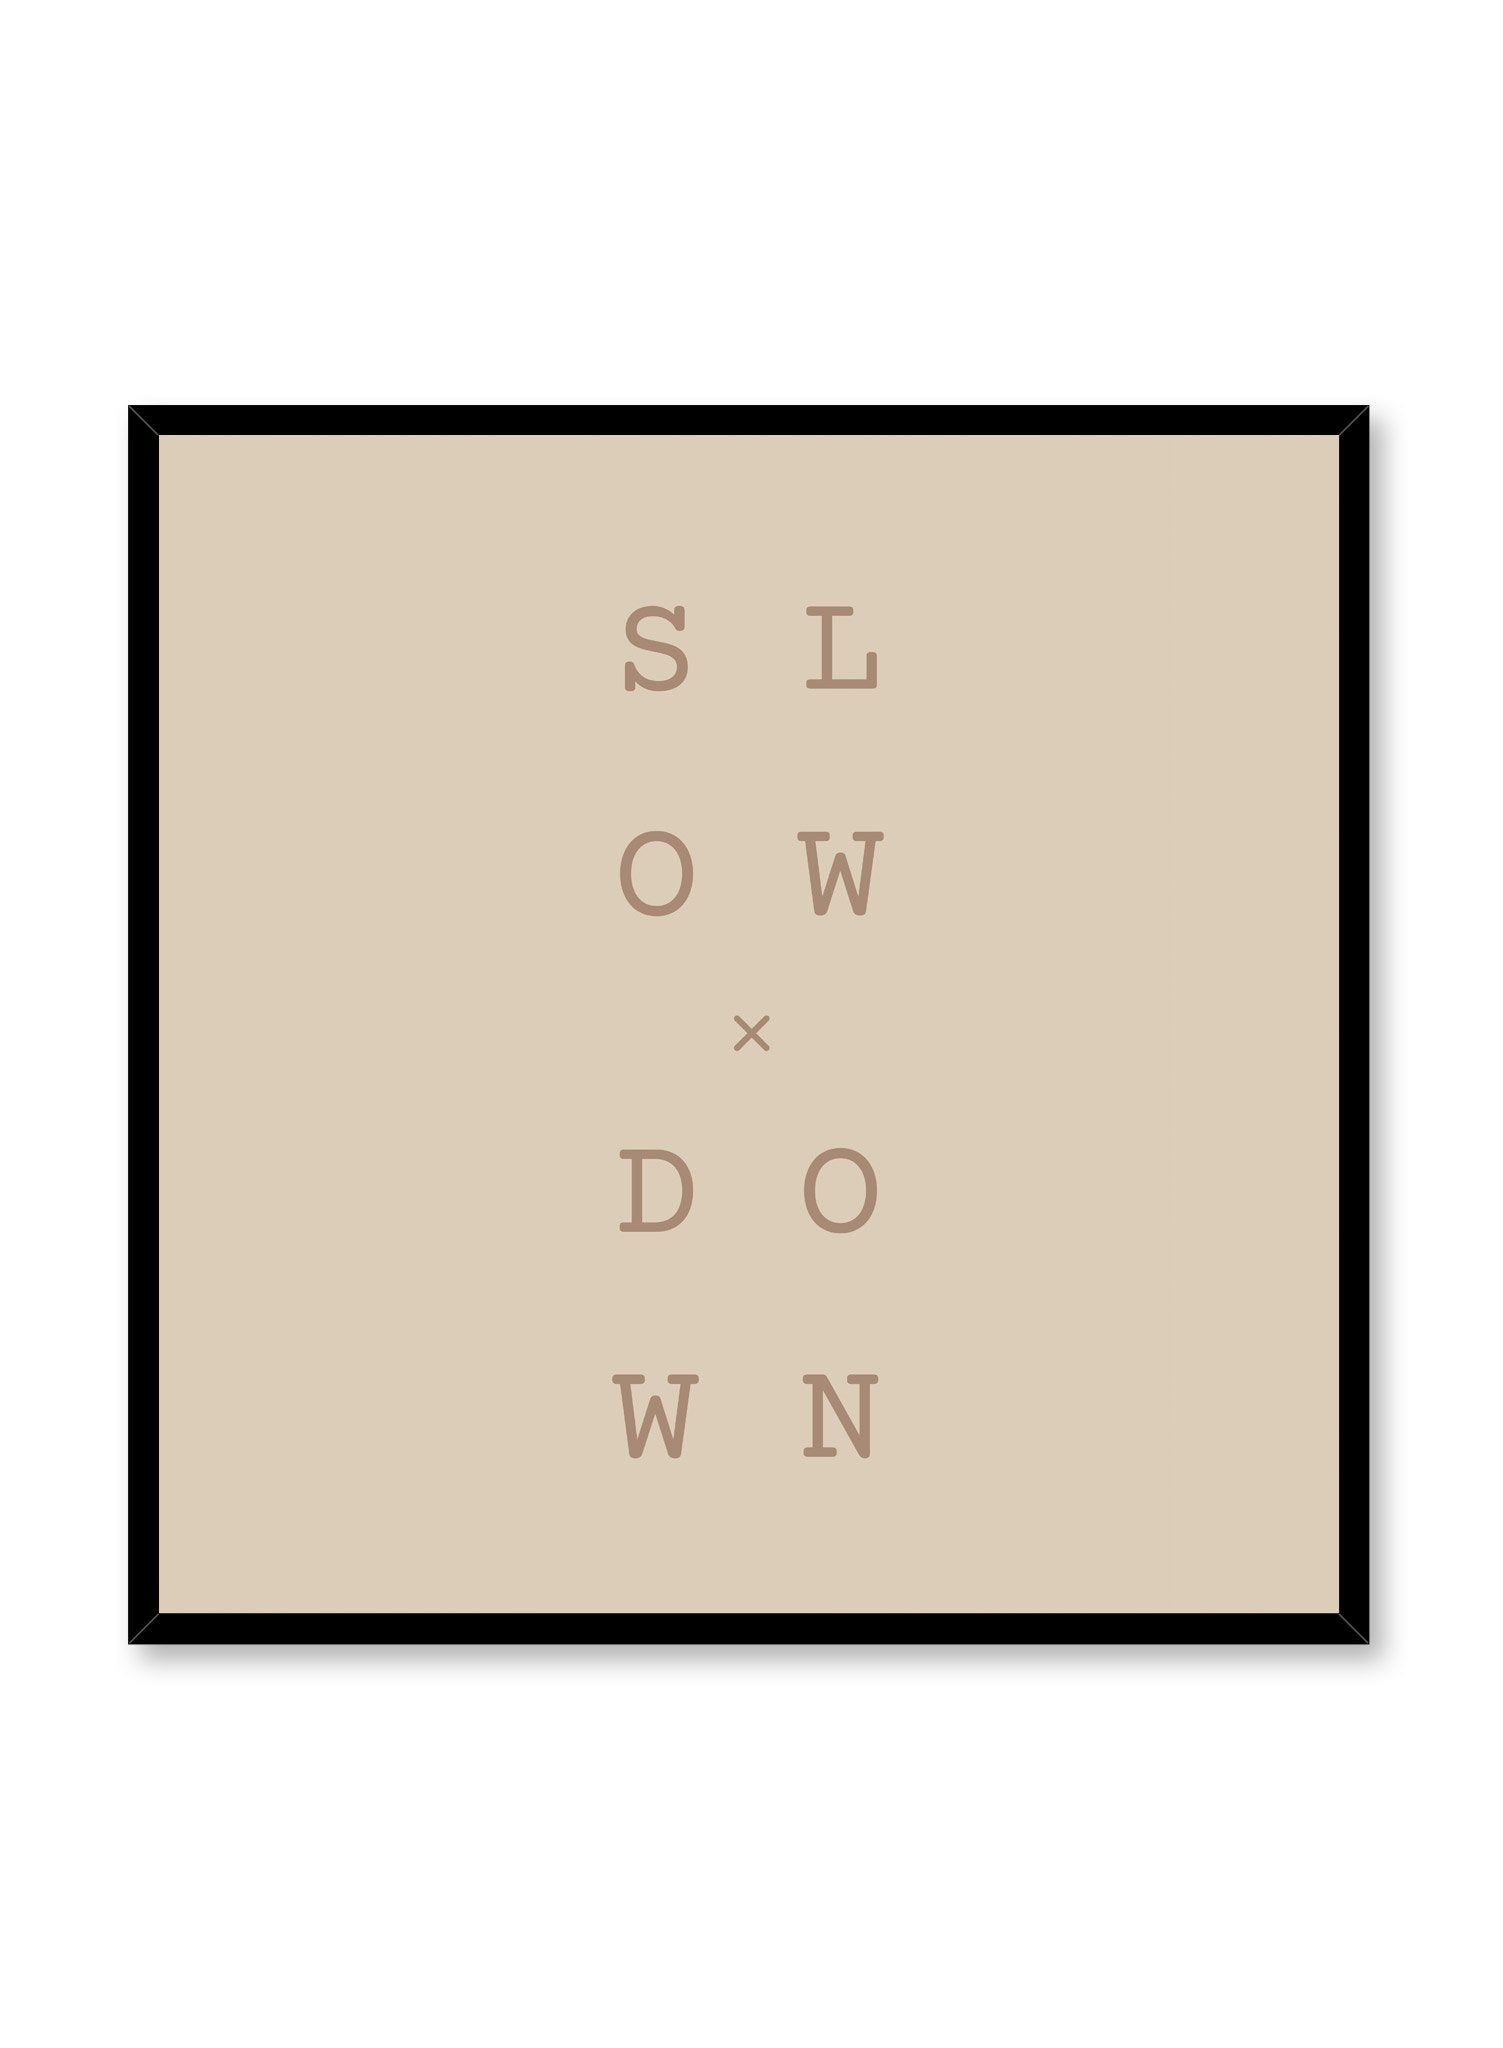 Modern minimalist poster by Opposite Wall with graphic typo Slow x Down design in beige